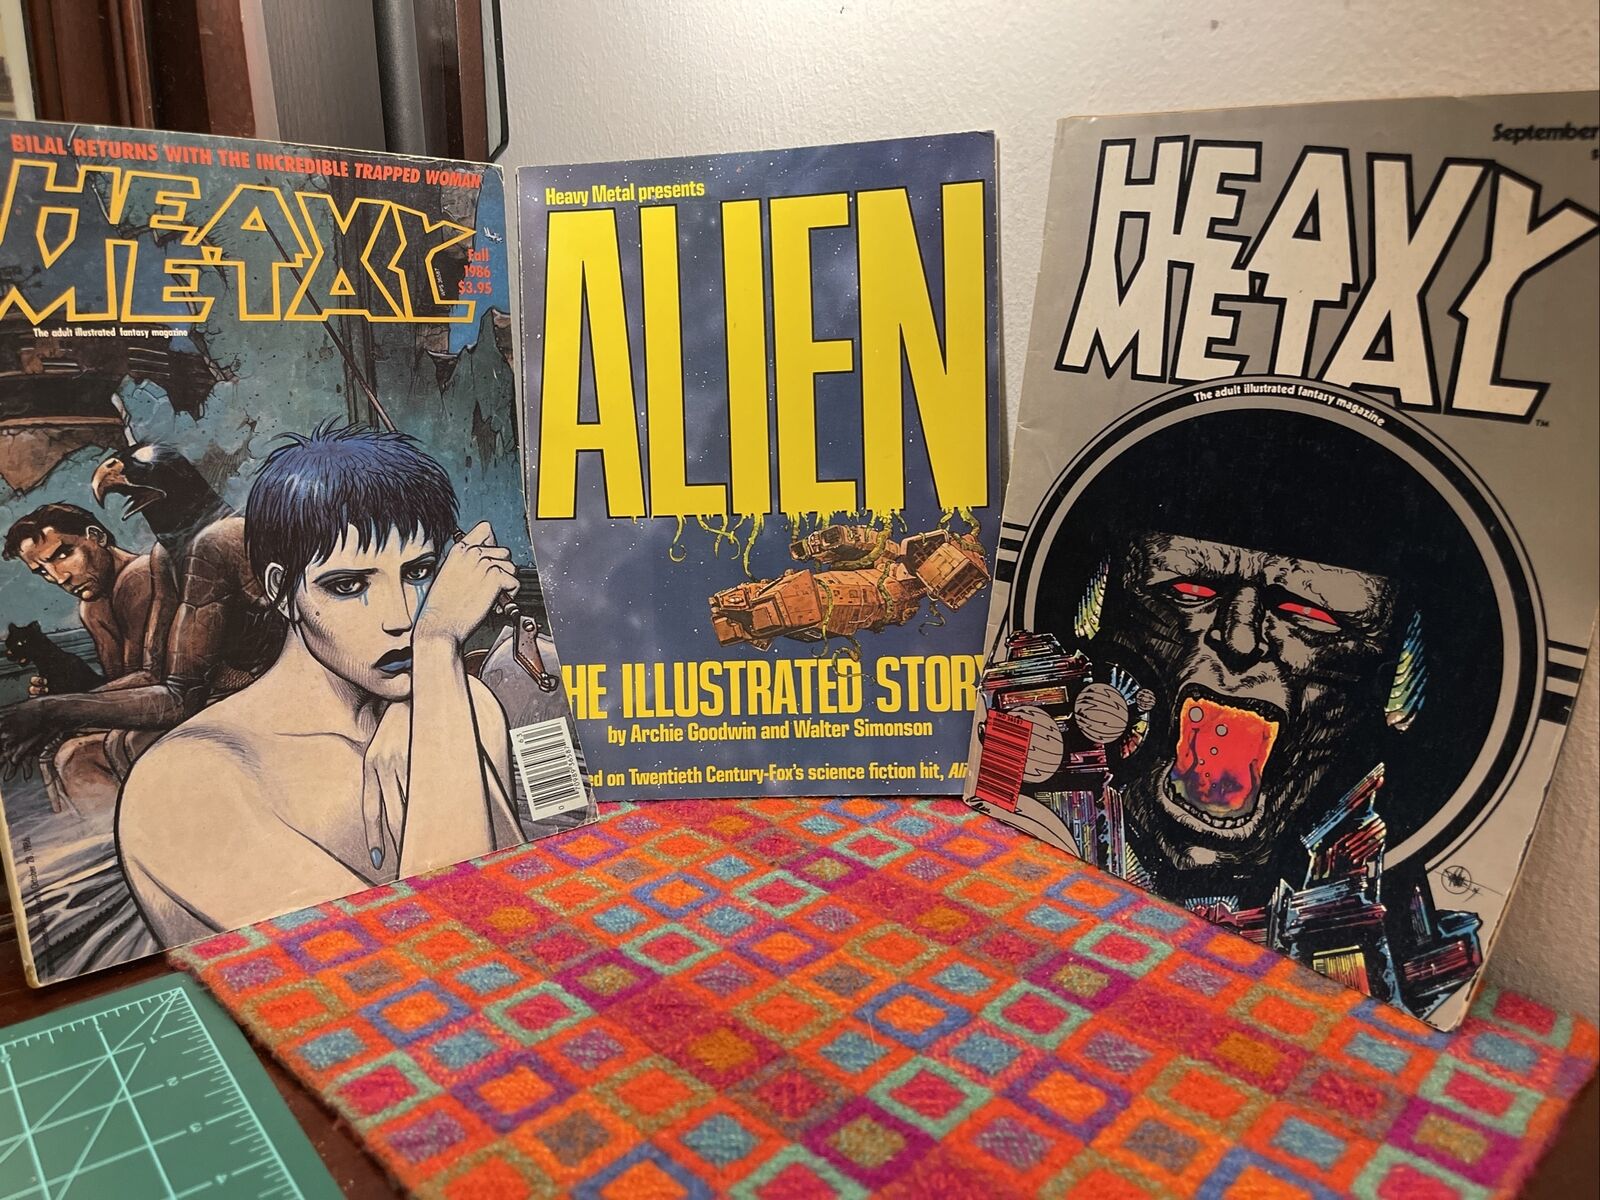 Heavy Metal Presents ALIEN THE ILLUSTRATED STORY 1979 Archie Goodwin Simonson